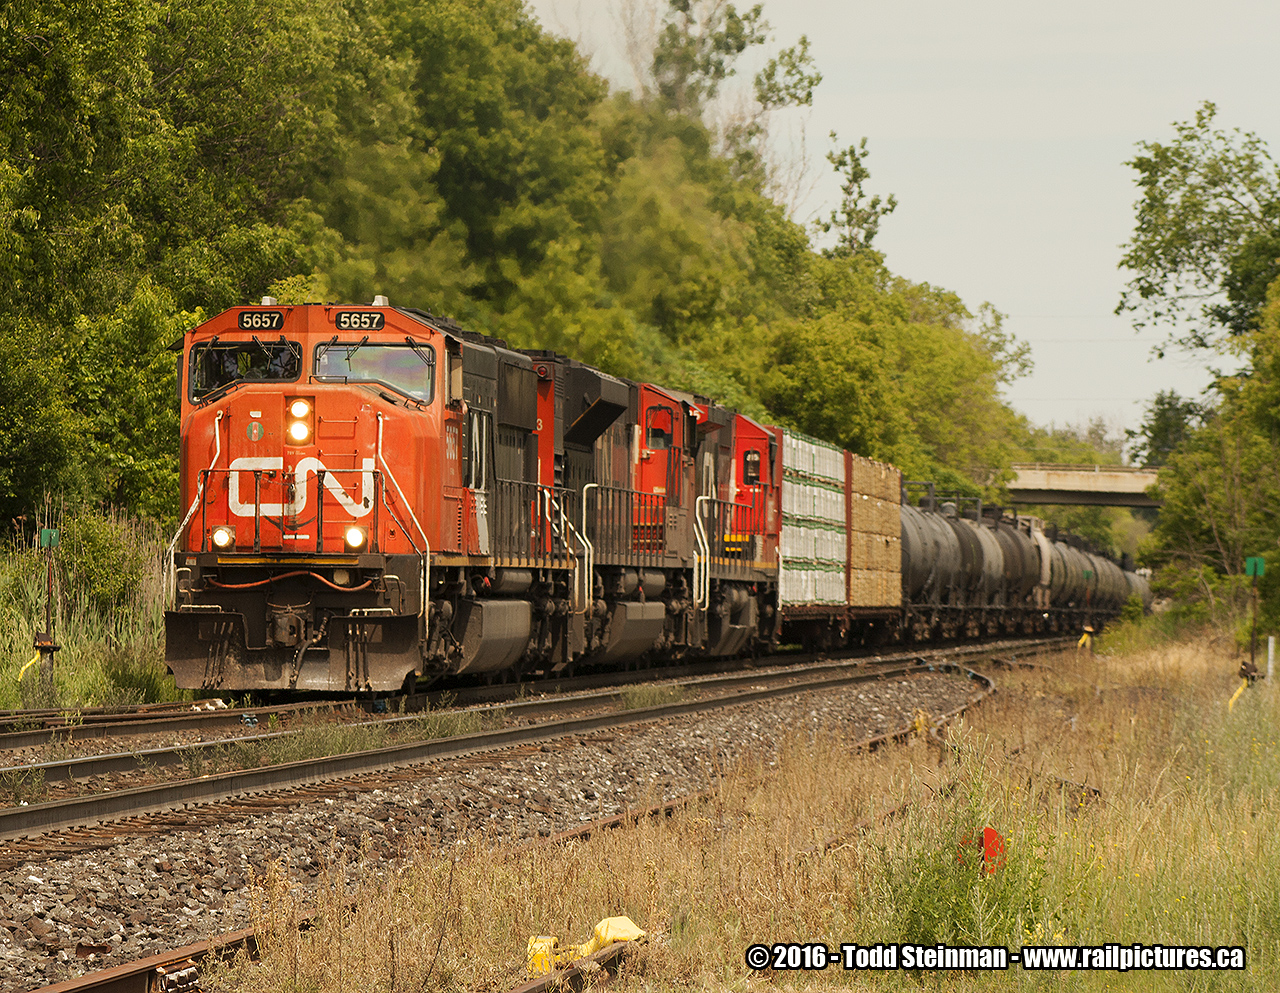 HOT, HAZY, HUMID... and with the hammer down! As it passes me at the old station site, CN 5657 (and two other units) leads this mostly tank car revenue freight up the Niagara Escarpment accelerating as it continues to all points west.